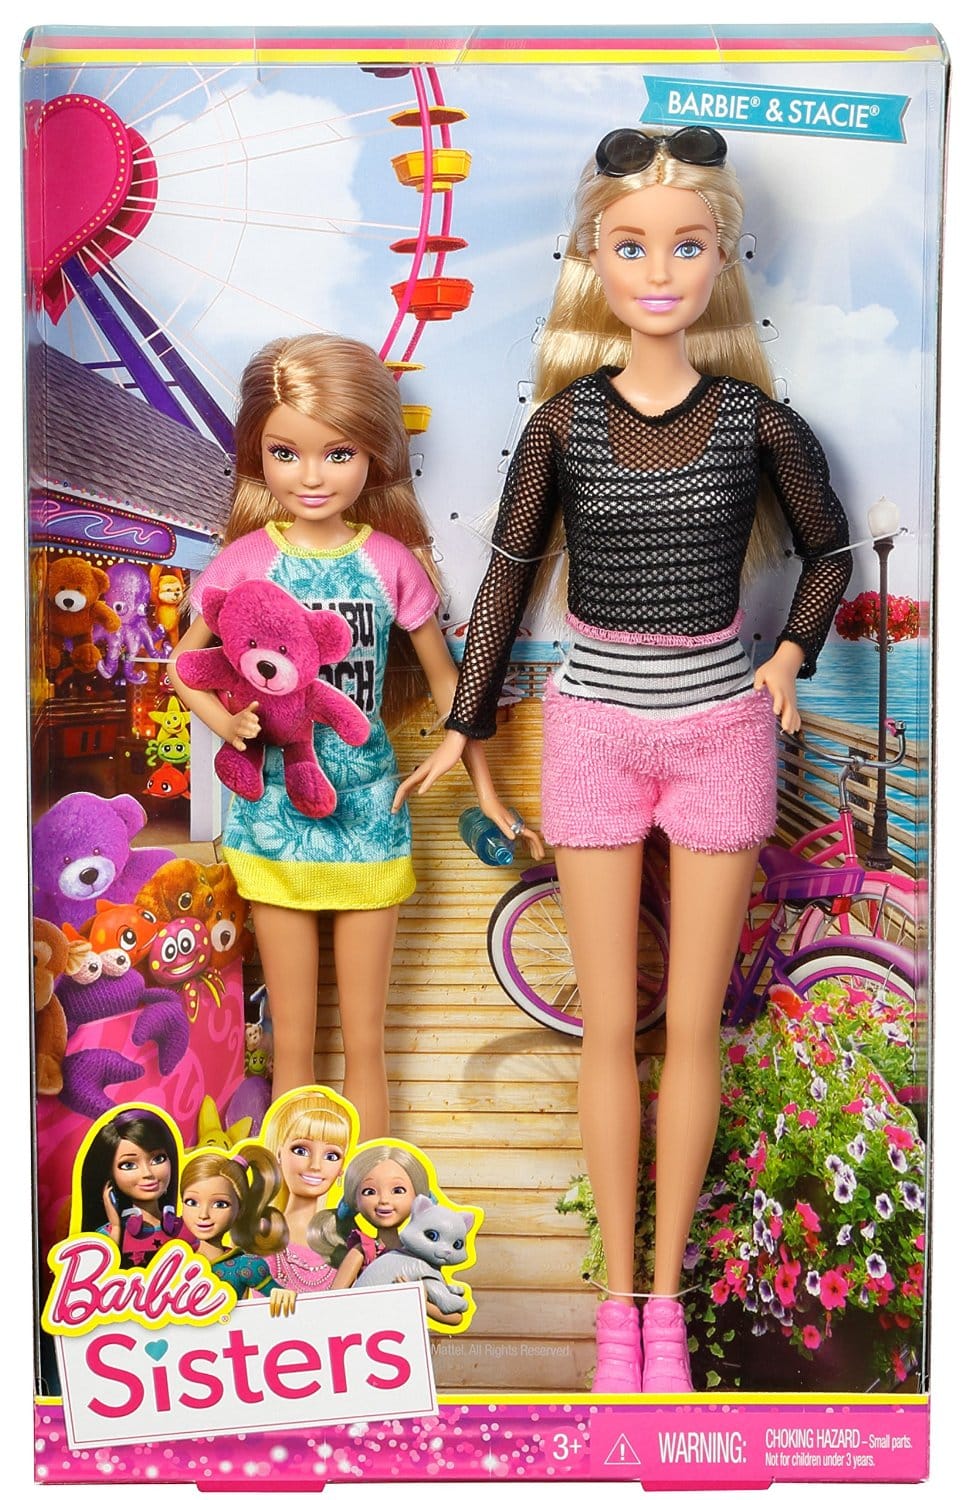 Barbie Sisters Barbie and Stacie Doll 2-Pack